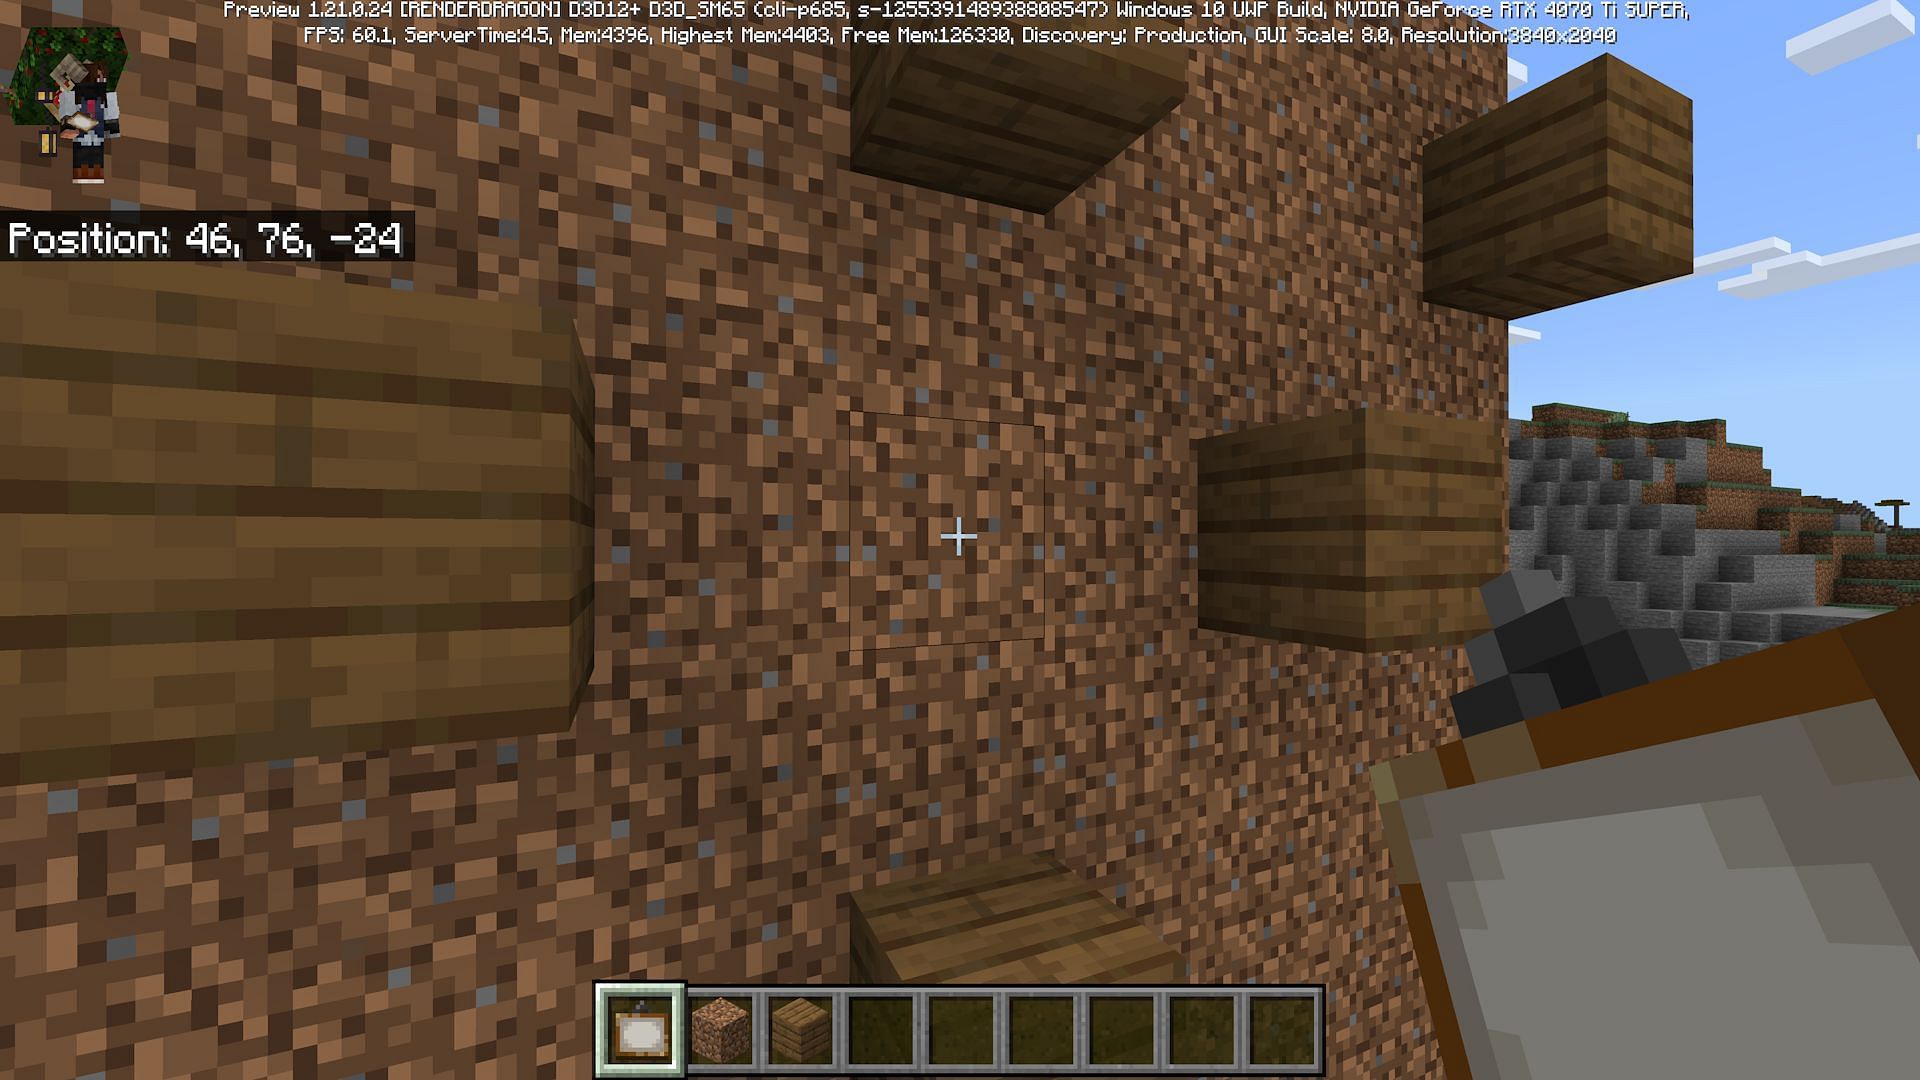 Placing a painting on the right block should stop smaller painting from appearing (Image via Mojang)